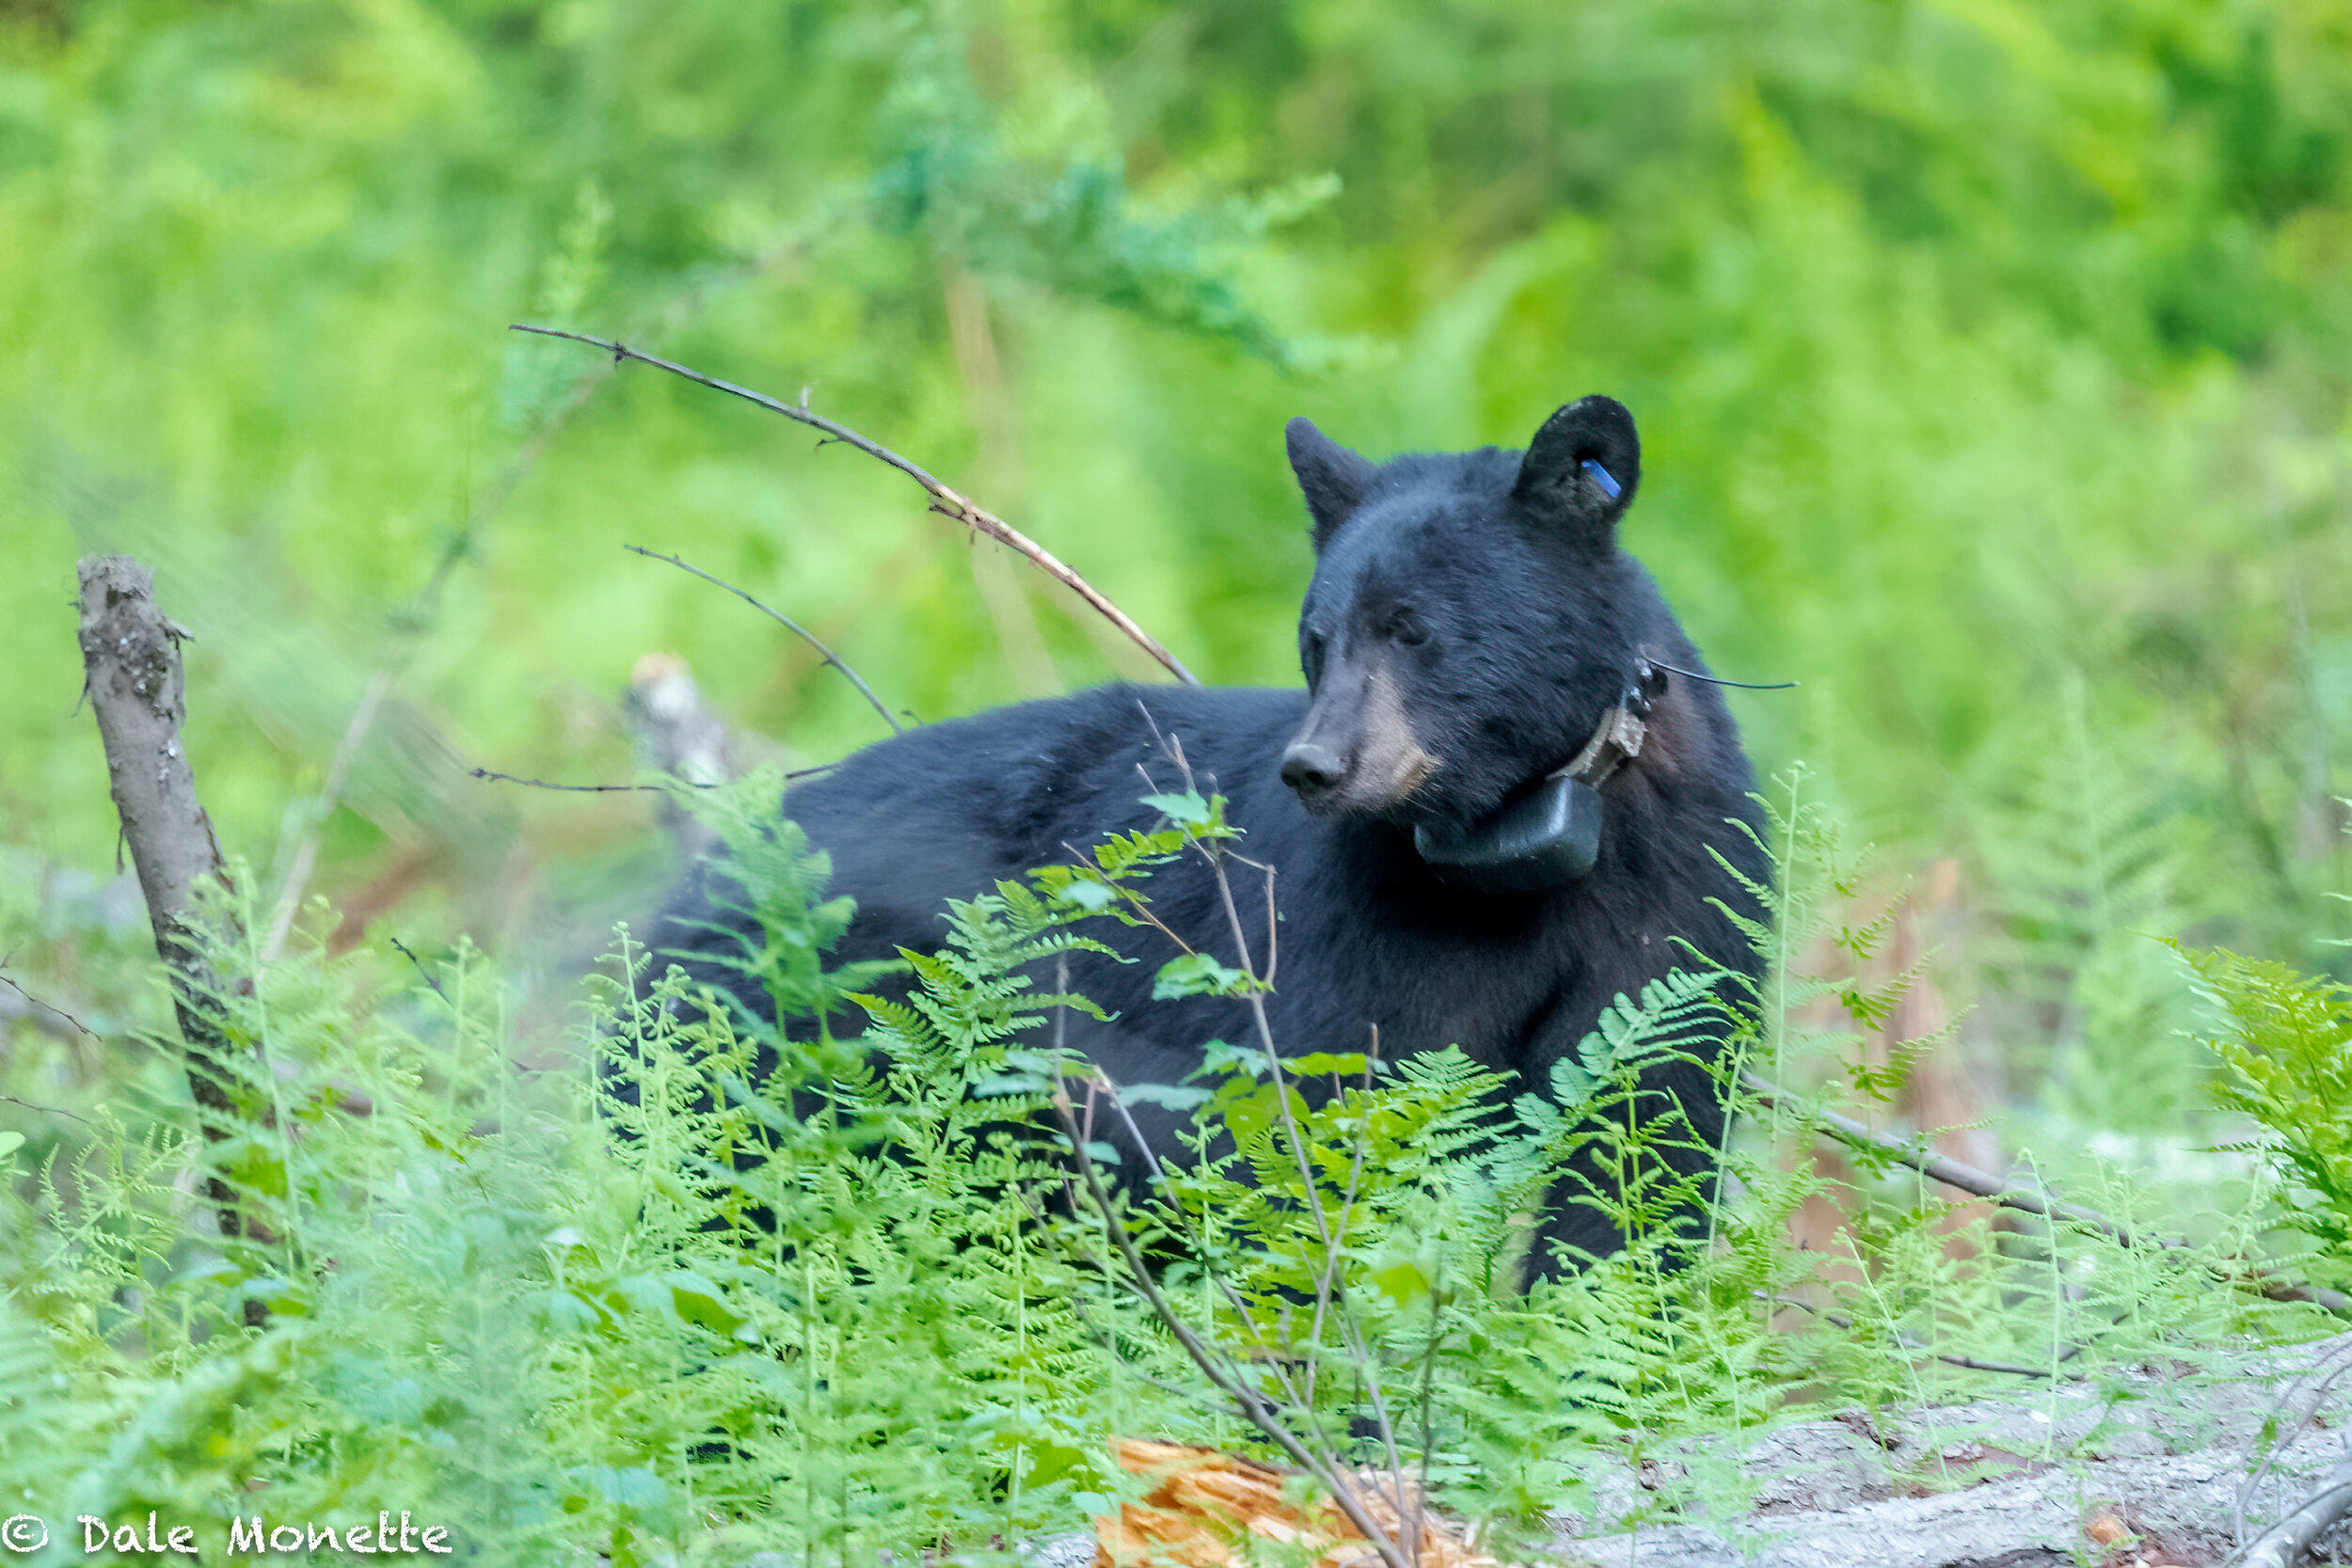   MassWildlife has radio collard bears all over Massachusetts that they are studying. The bears are darted with tranquilizers and the weighed, measured and released back into the wild with their collars on. Biologist have some bears with satellite co